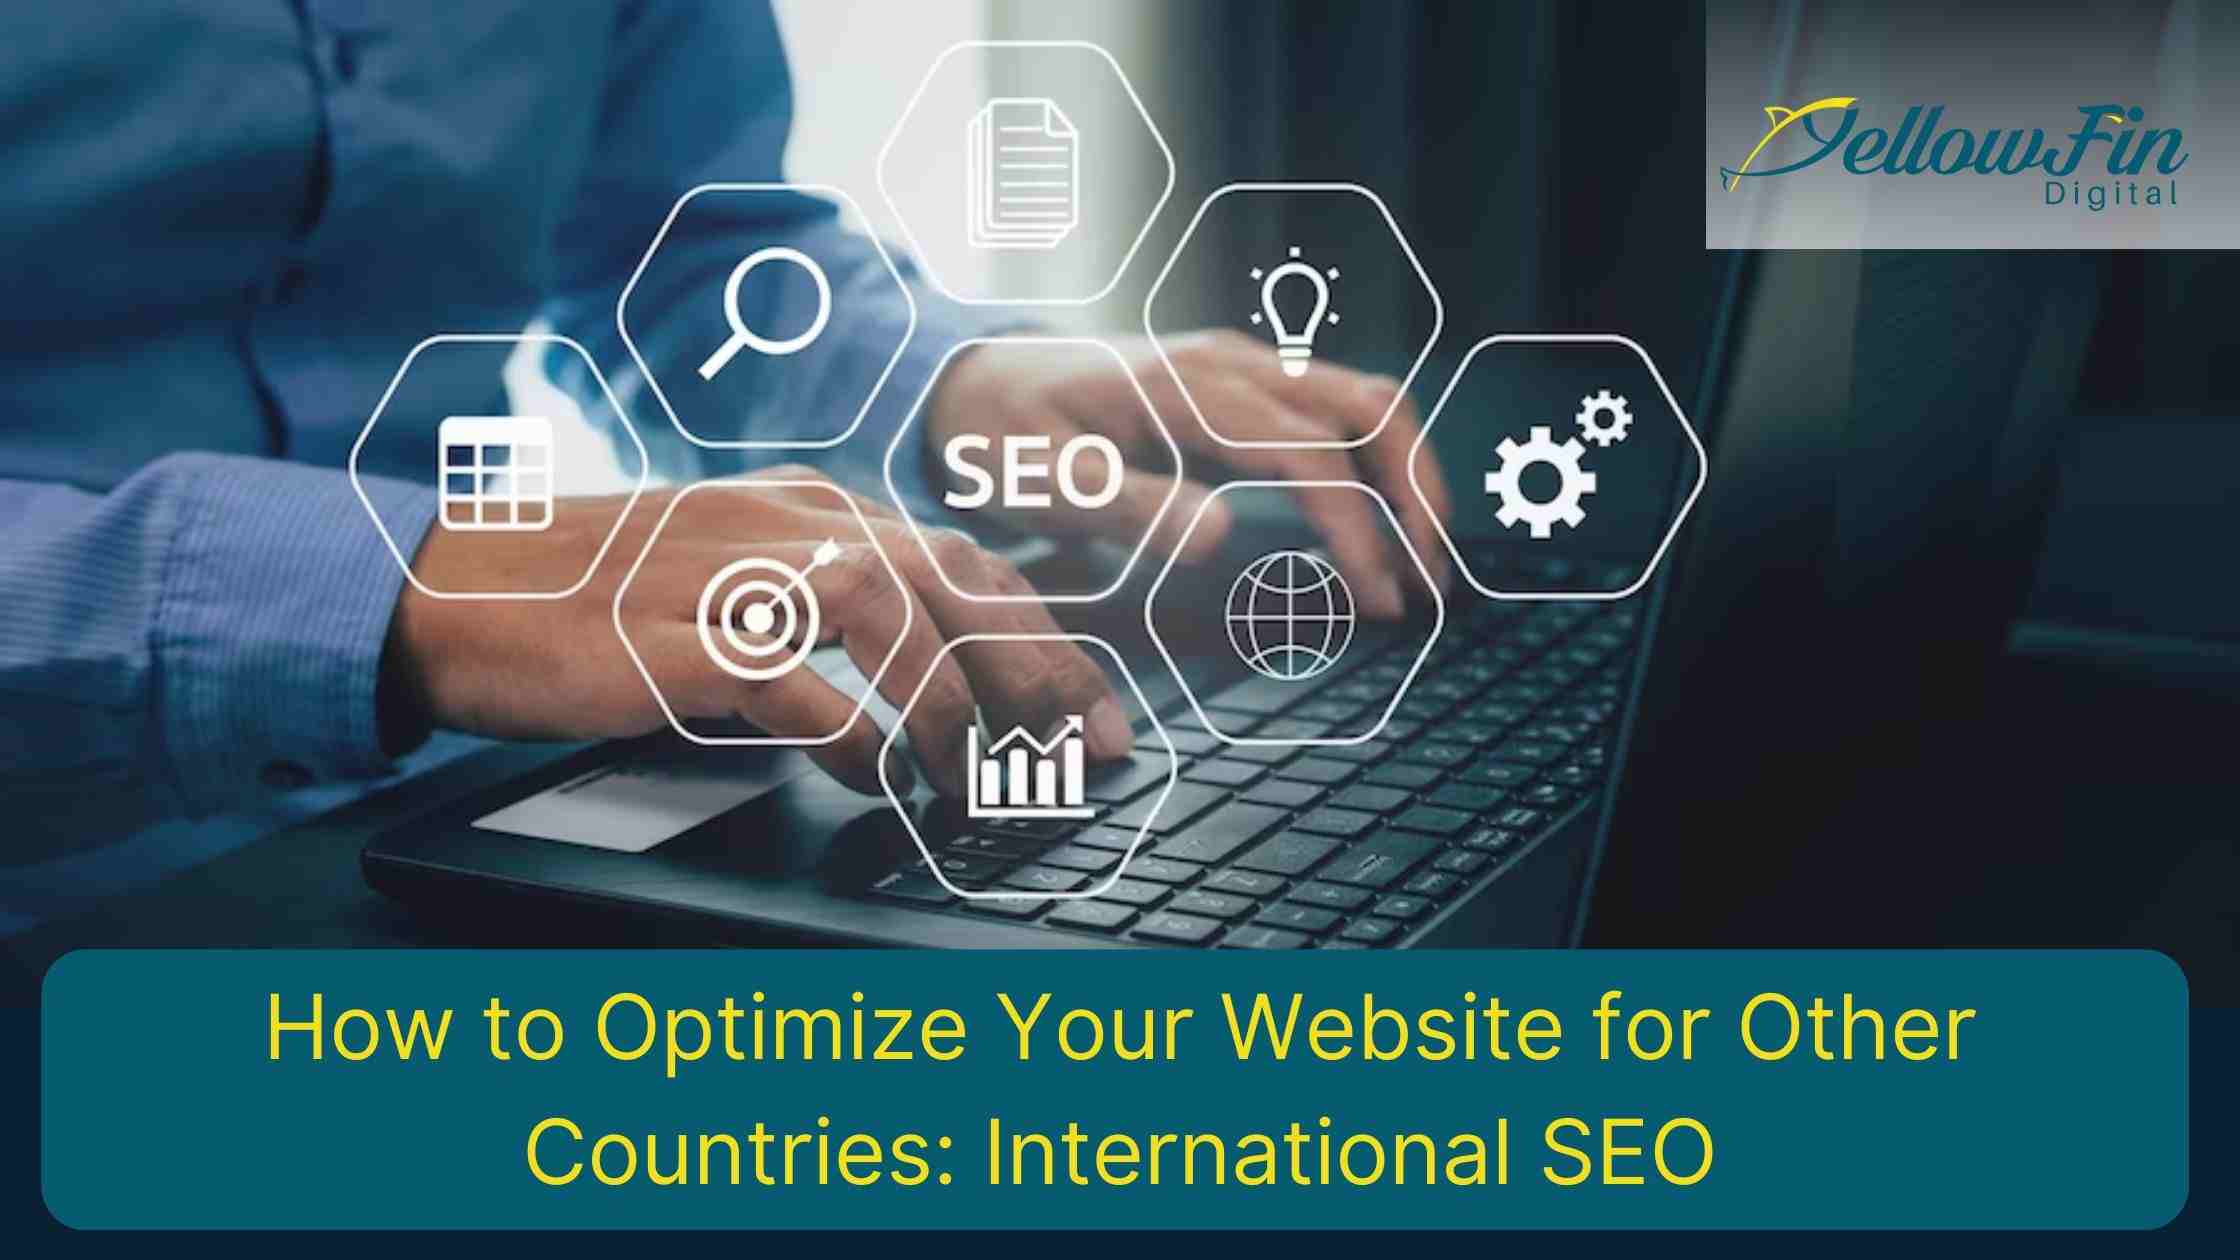 How to Optimize Your Website for Other Countries: International SEO